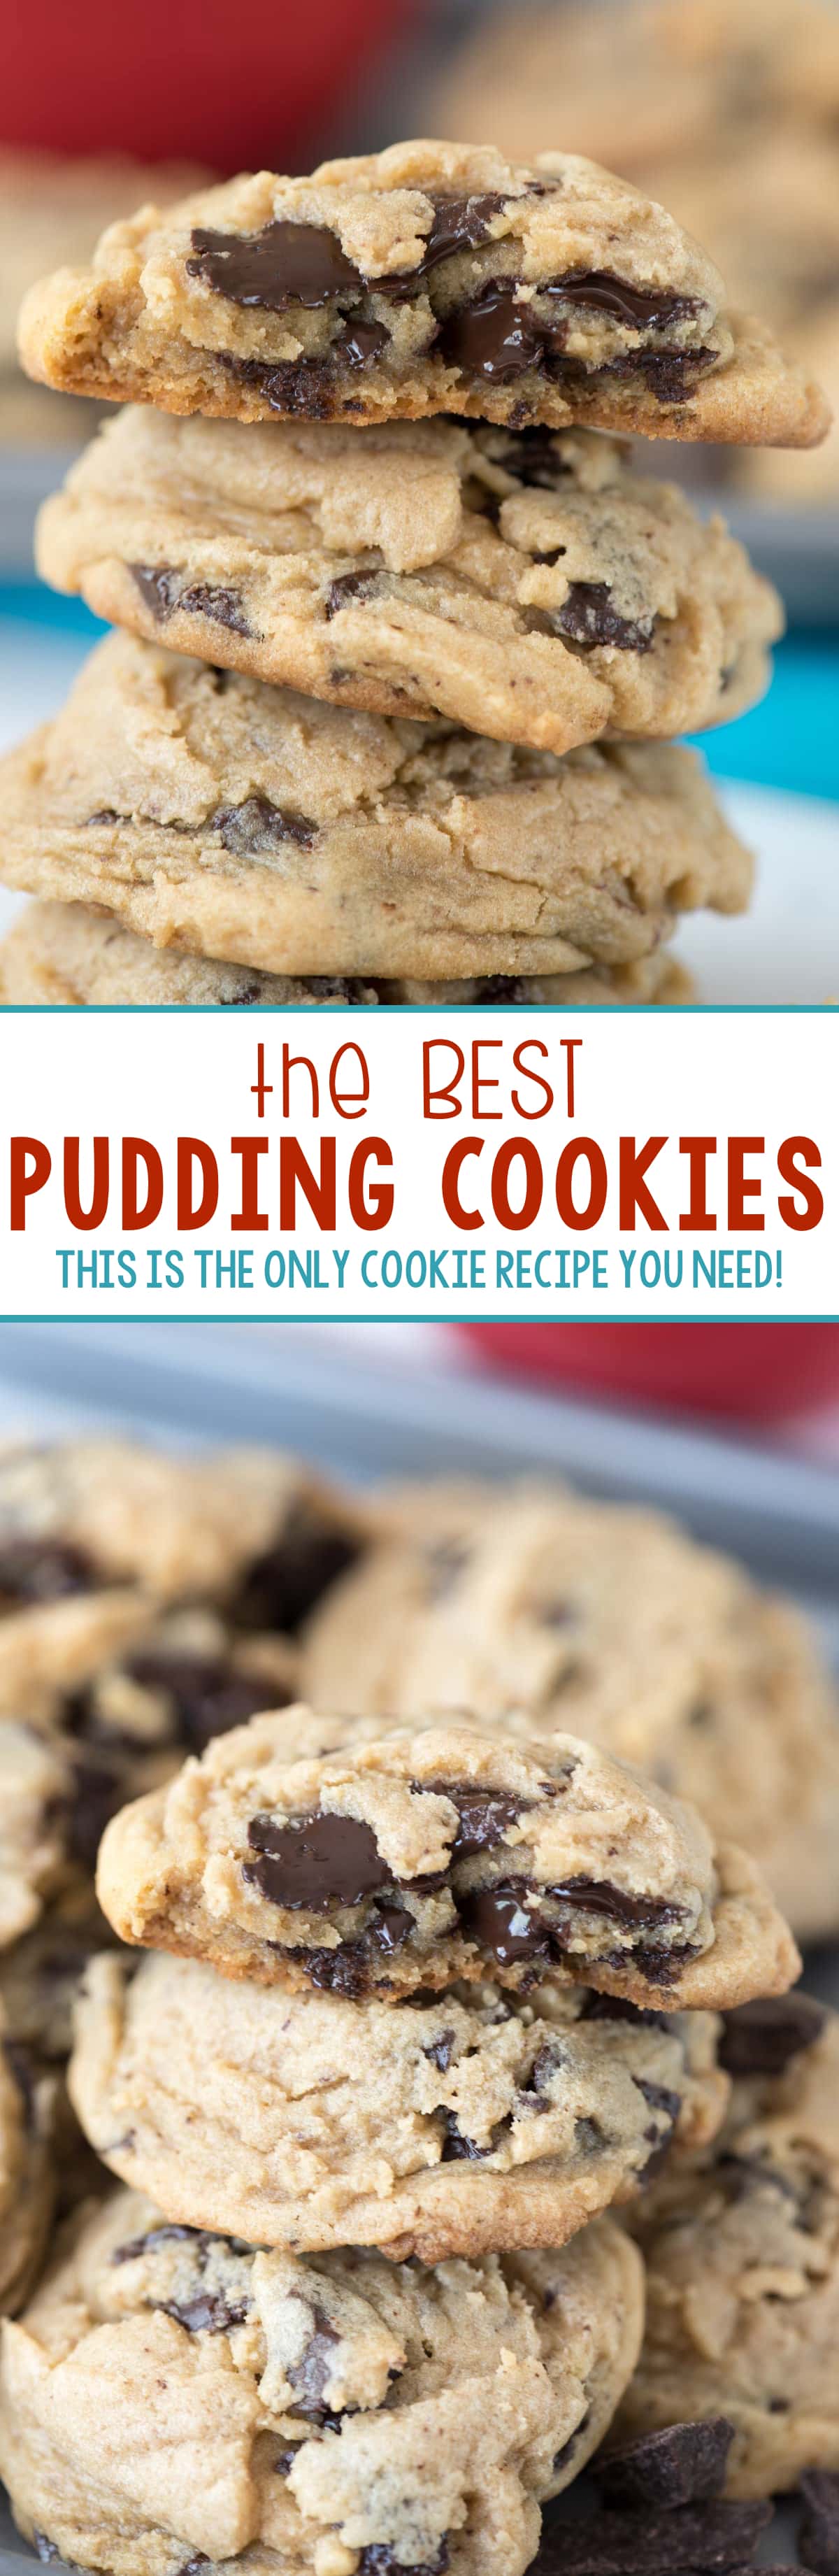 BEST Pudding Cookies Recipe - this is the only cookie recipe you need! Use your favorite pudding mix to make the softest, puffiest cookies that stay fresh for days!